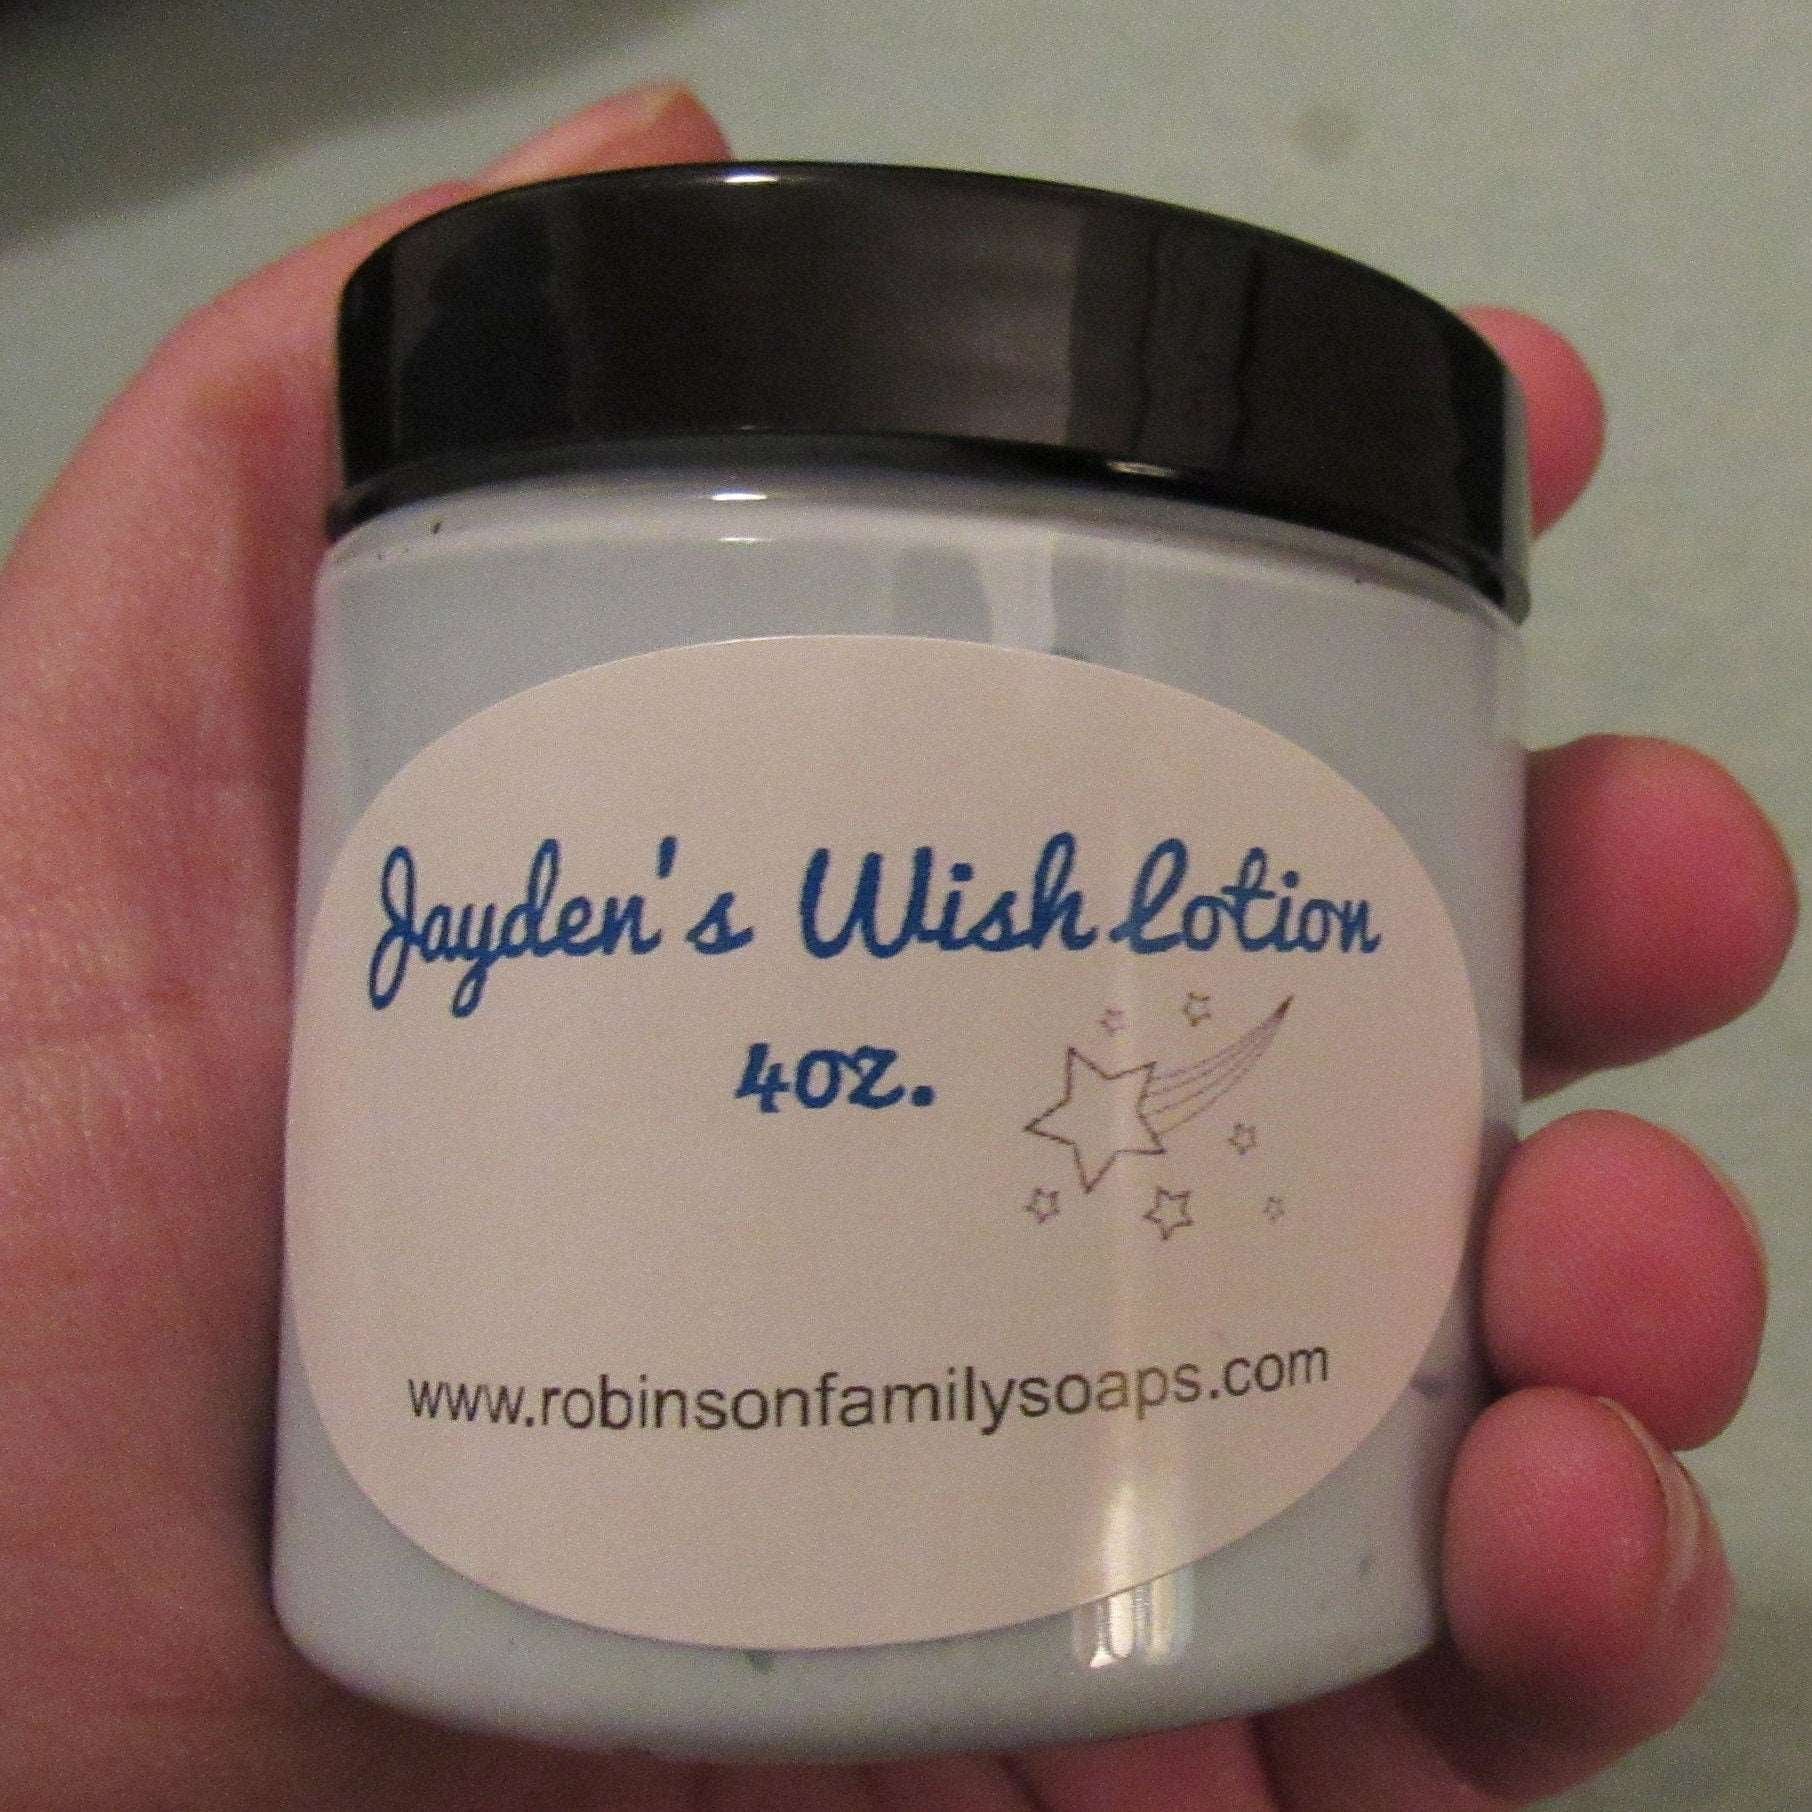 Jayden's Wish Lotions for Sensitive Skin & Skin Aliments Scented & Fragrance Free Lotion & Moisturizer Robinson Family Soaps   